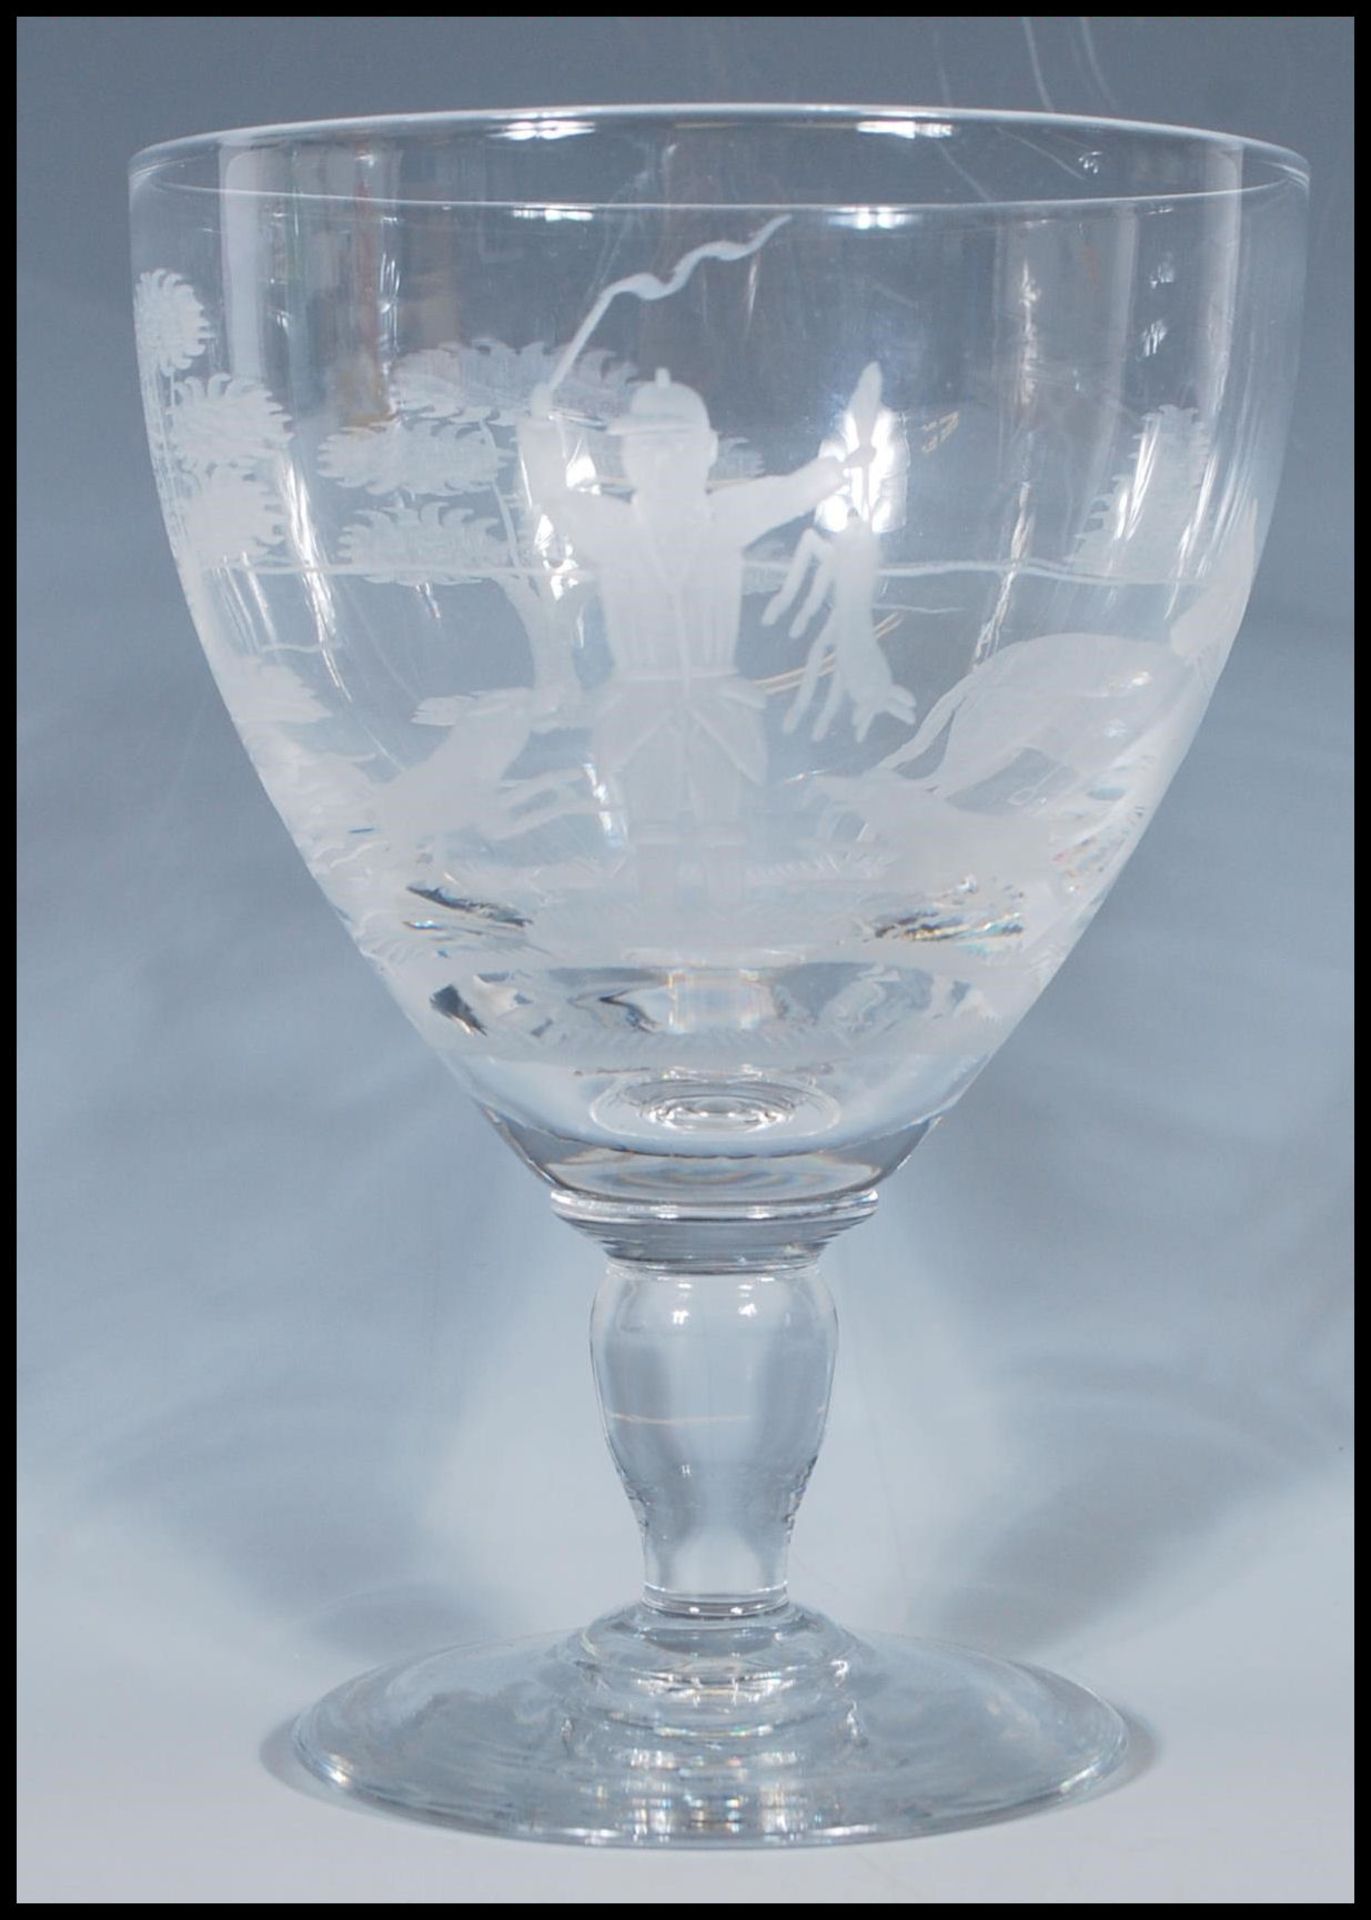 Hunting interest- A large 19th Century Victorian glass goblet having engraved hunting scenes